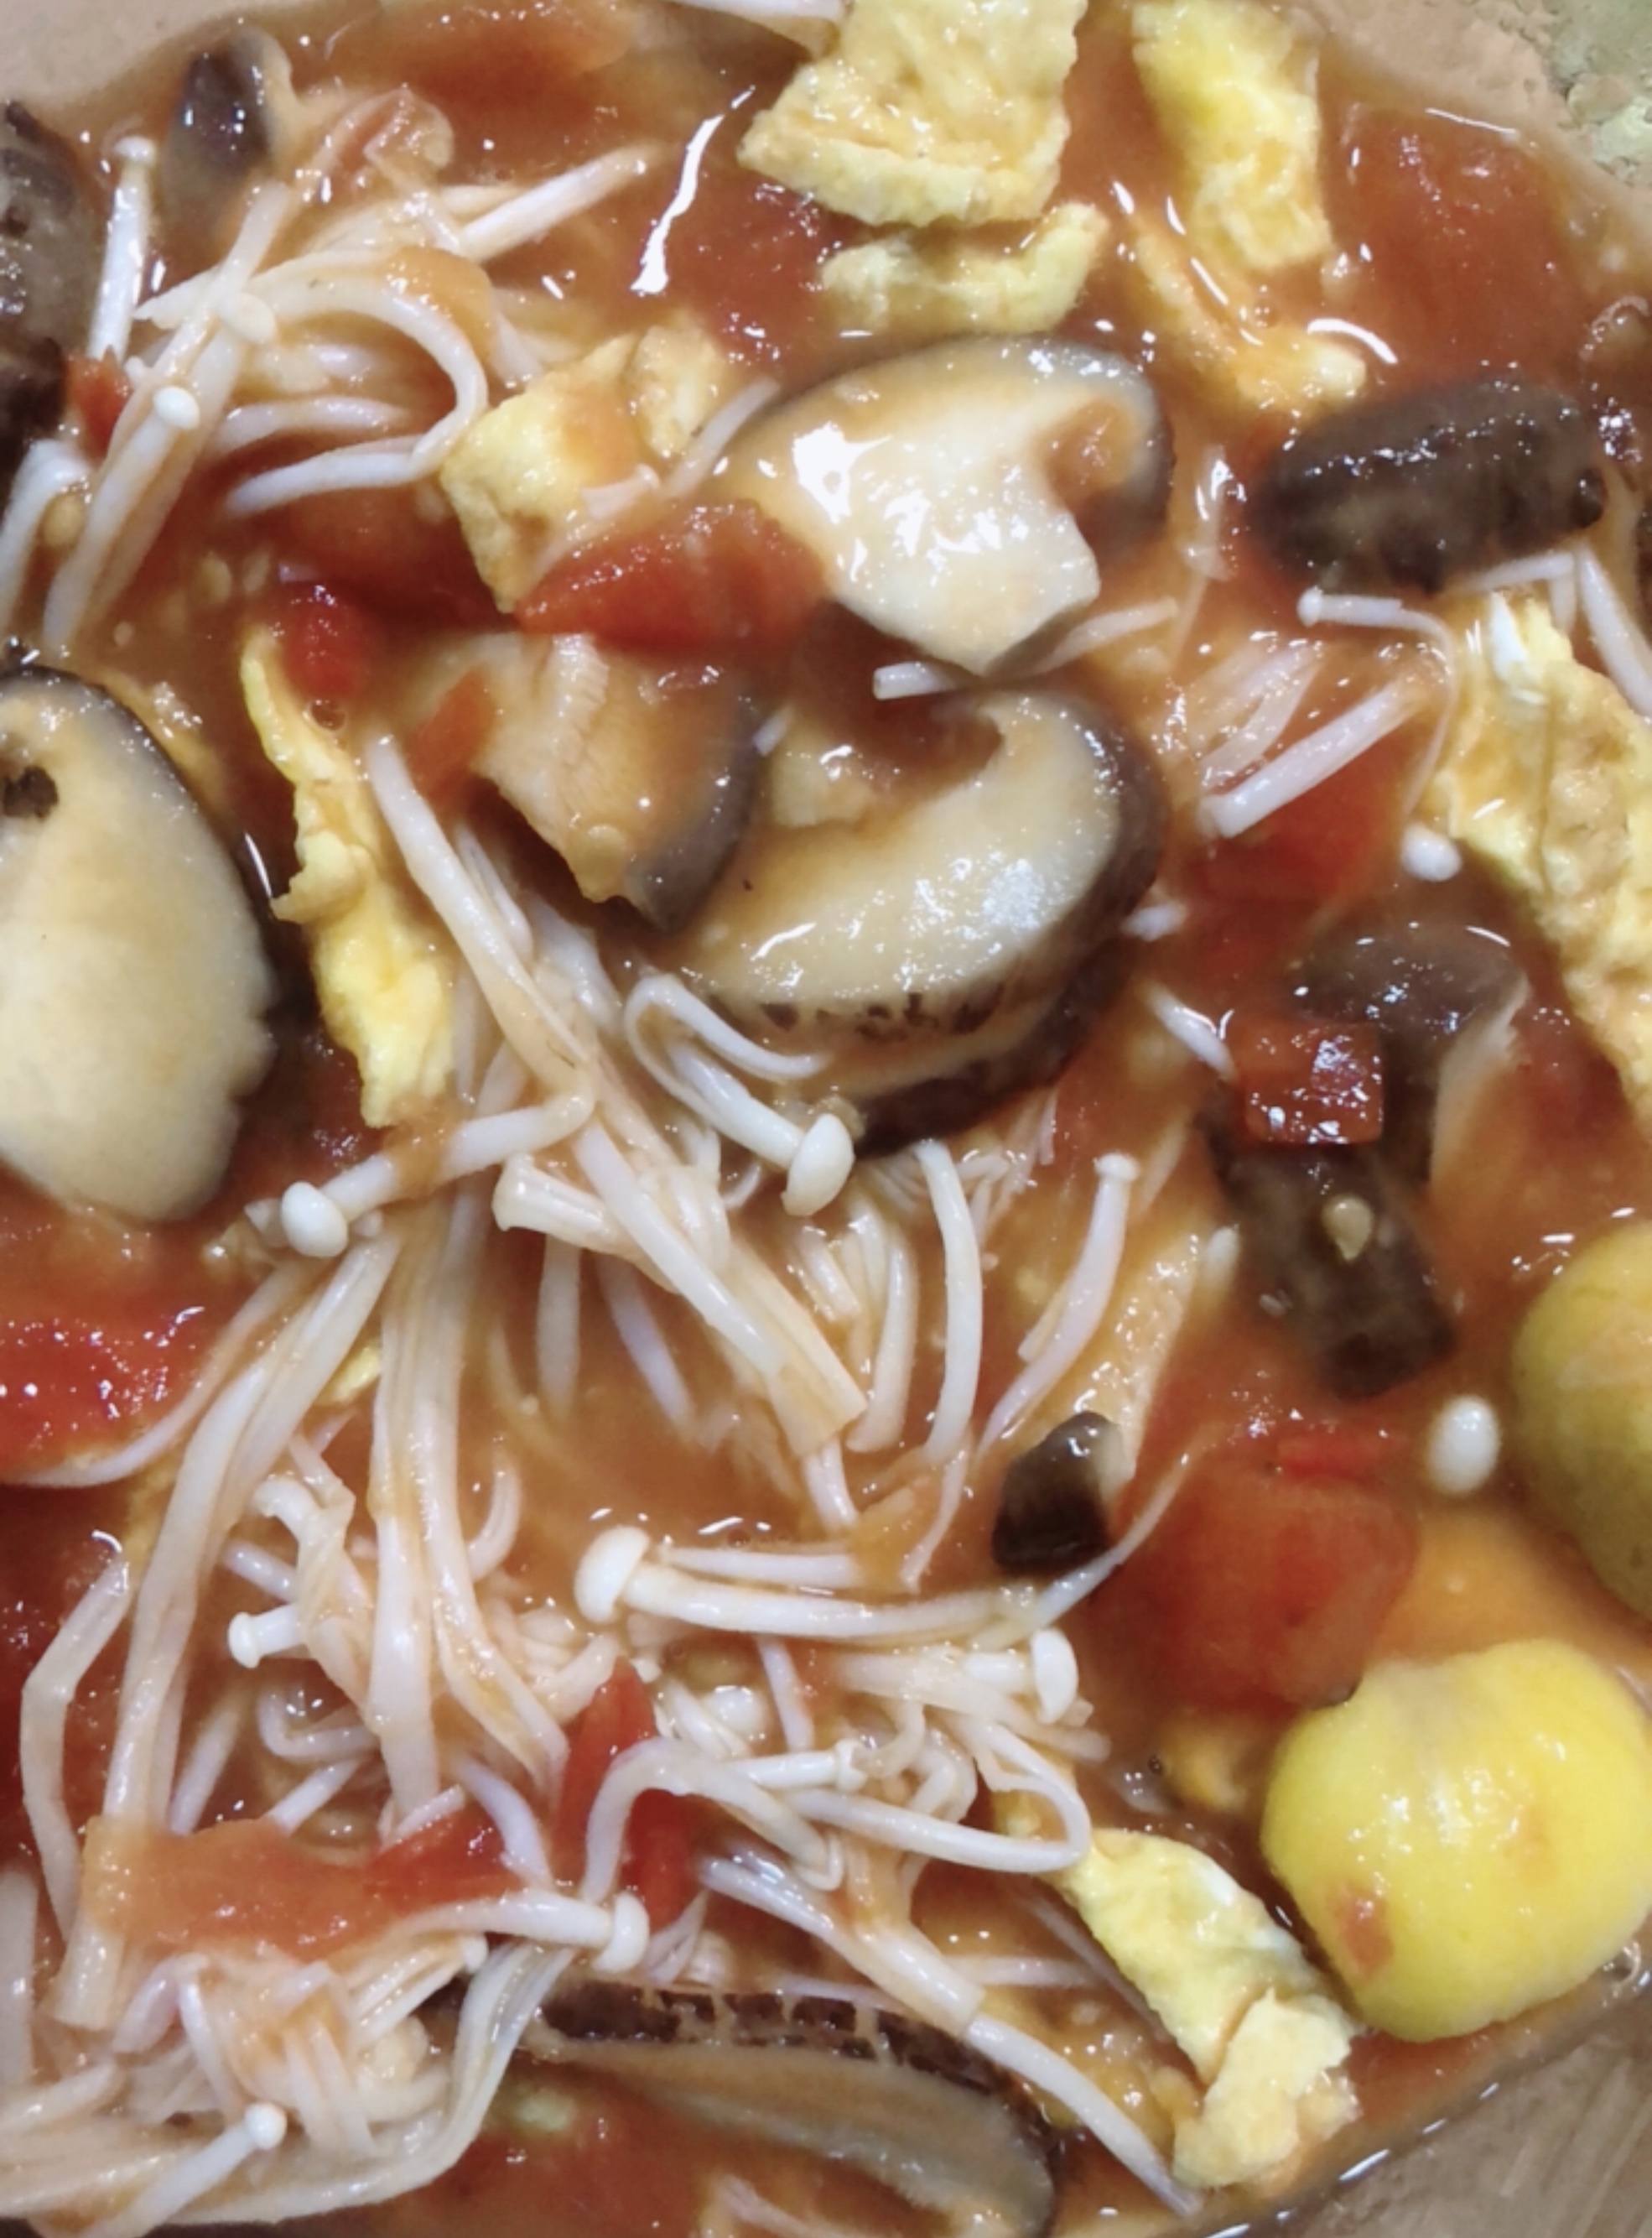 
The practice of soup of tomato bacterium mushroom, how is soup of tomato bacterium mushroom done delicious